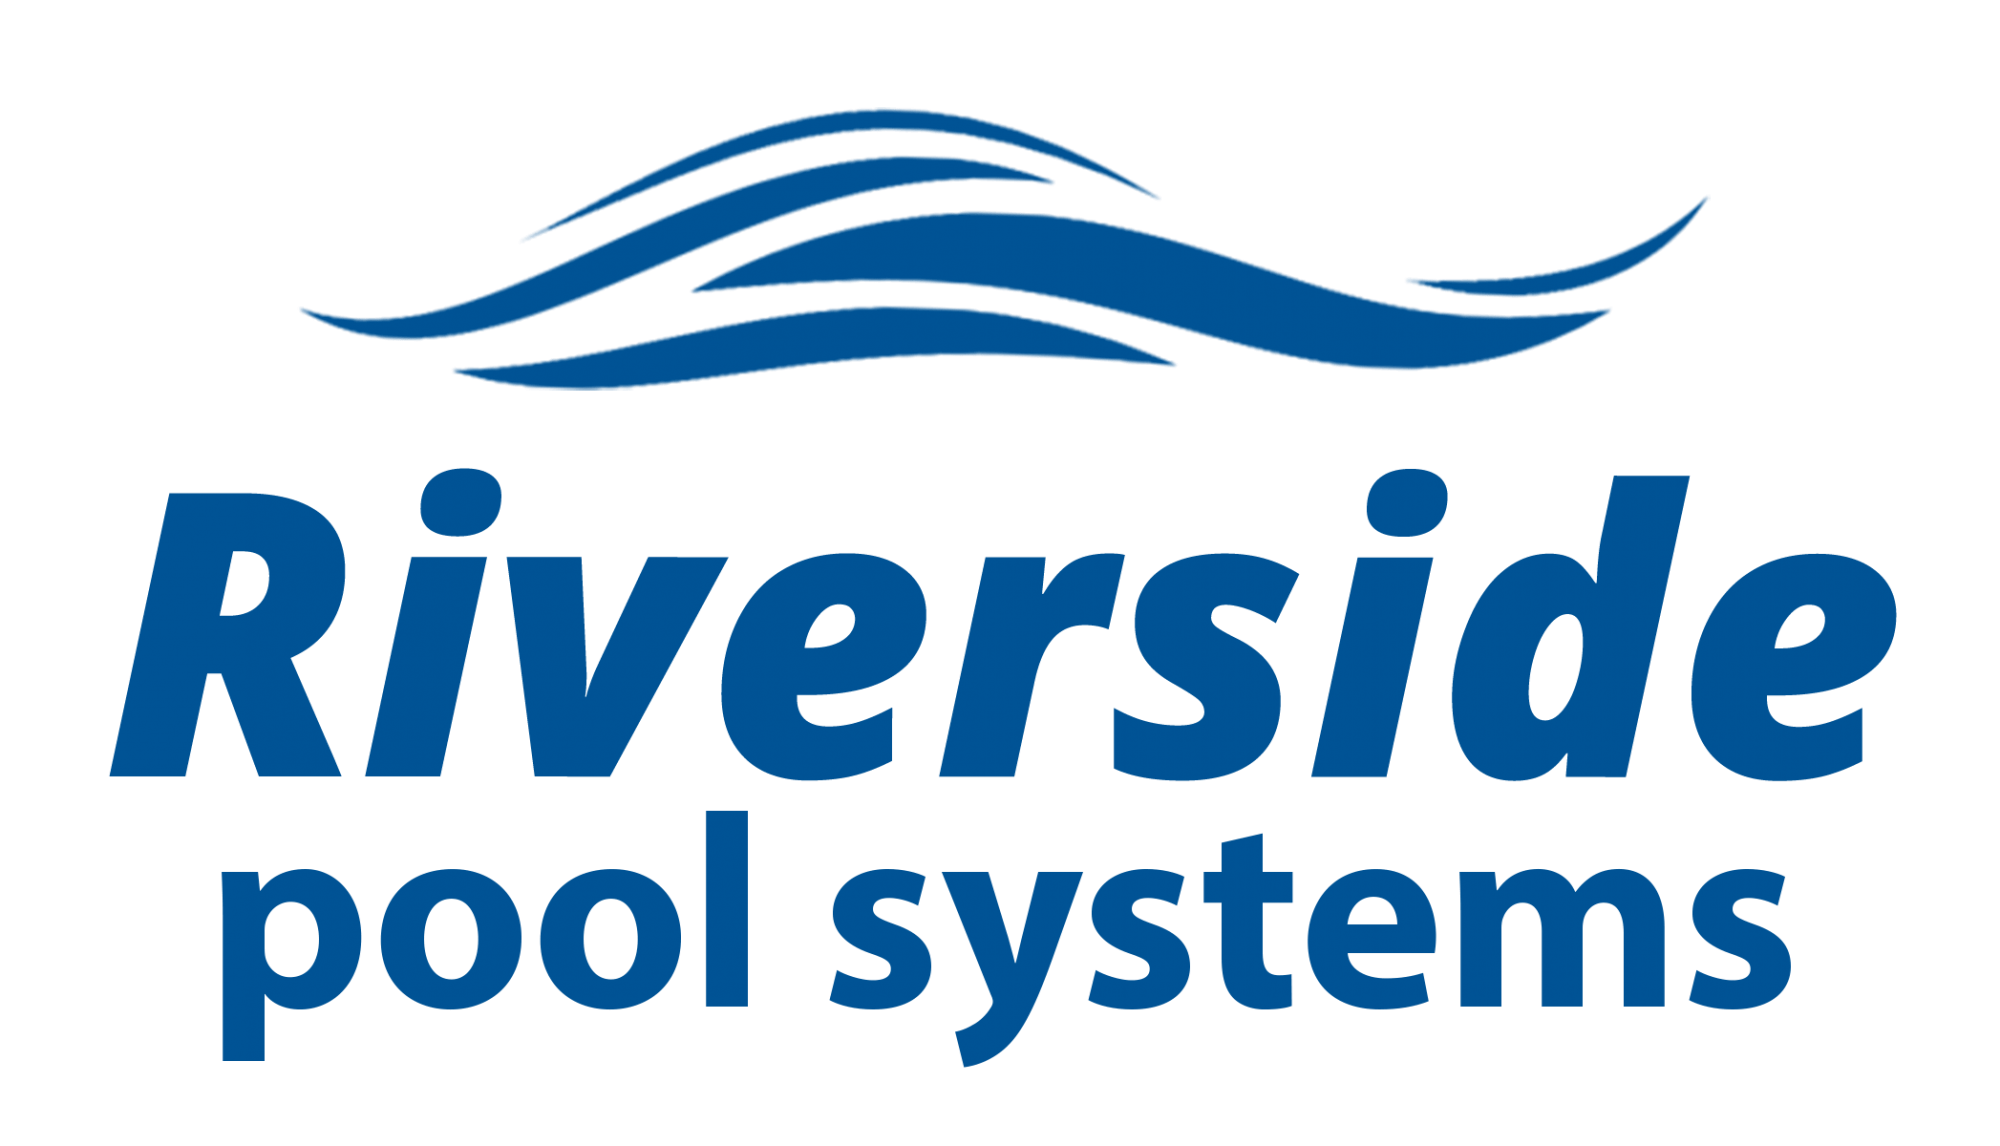 Riverside Pool Systems